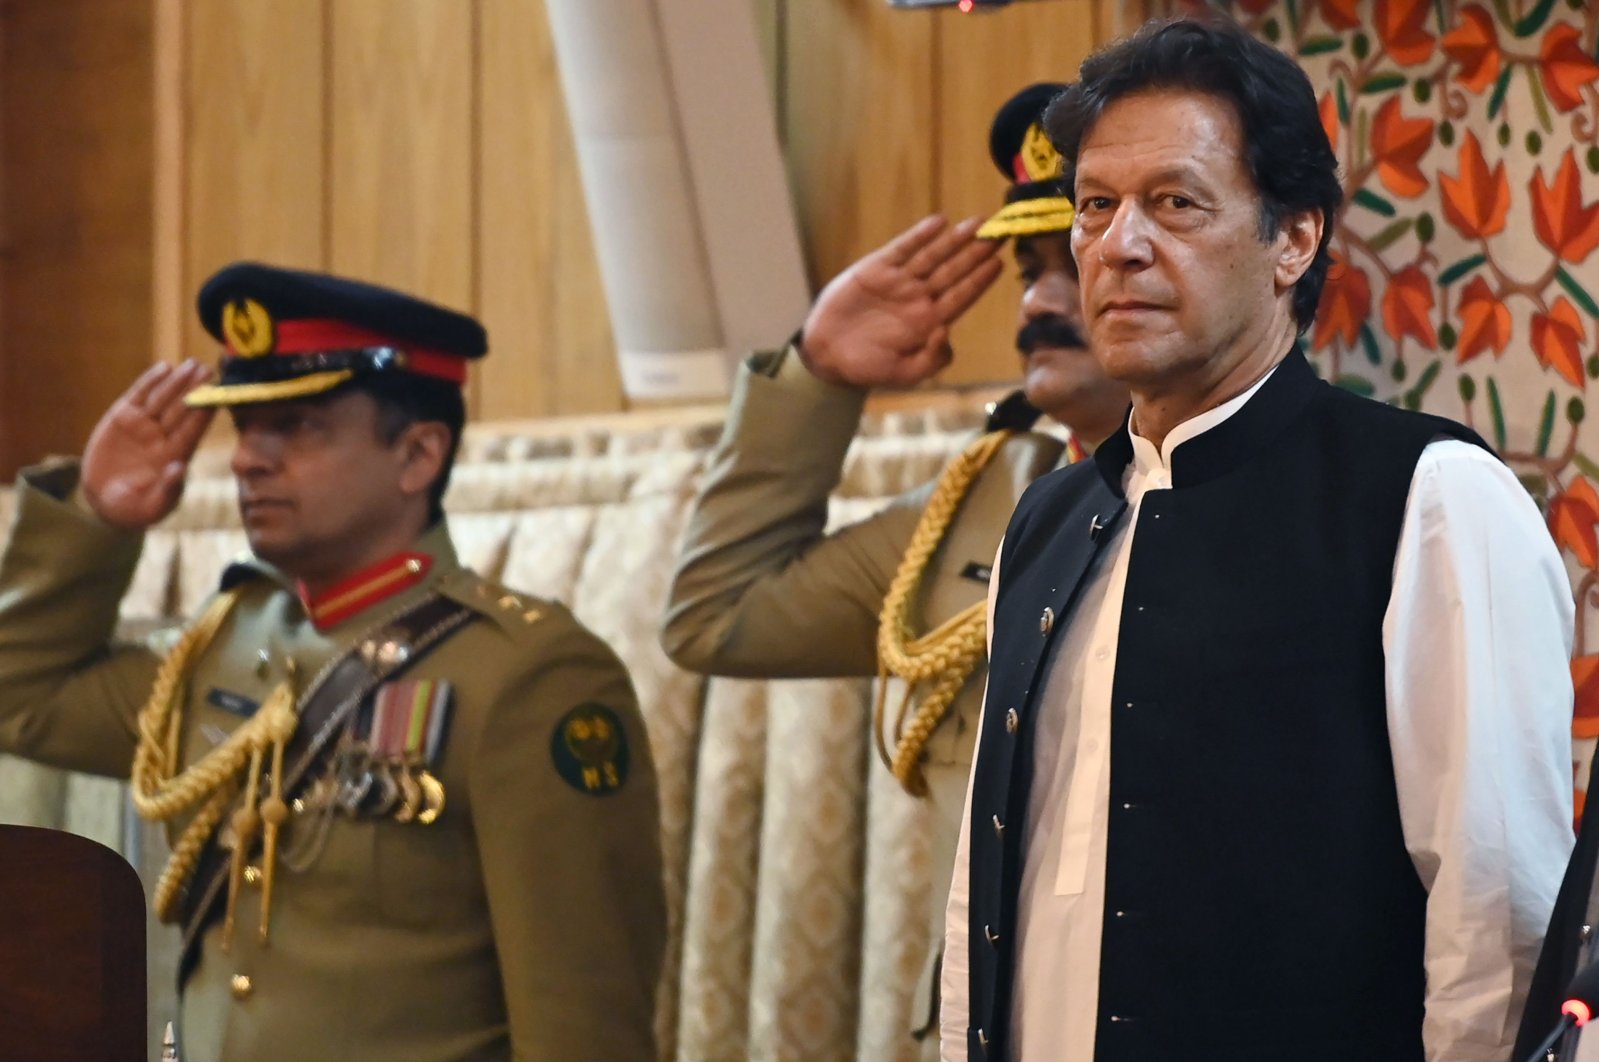 Pakistan's Prime Minister Imran Khan (R) listens to the national anthem as he arrives at the legislative assembly in Muzaffarabad, the capital of Pakistan-controlled Kashmir to mark the country's Independence Day, Aug. 14, 2019. (AFP Photo)